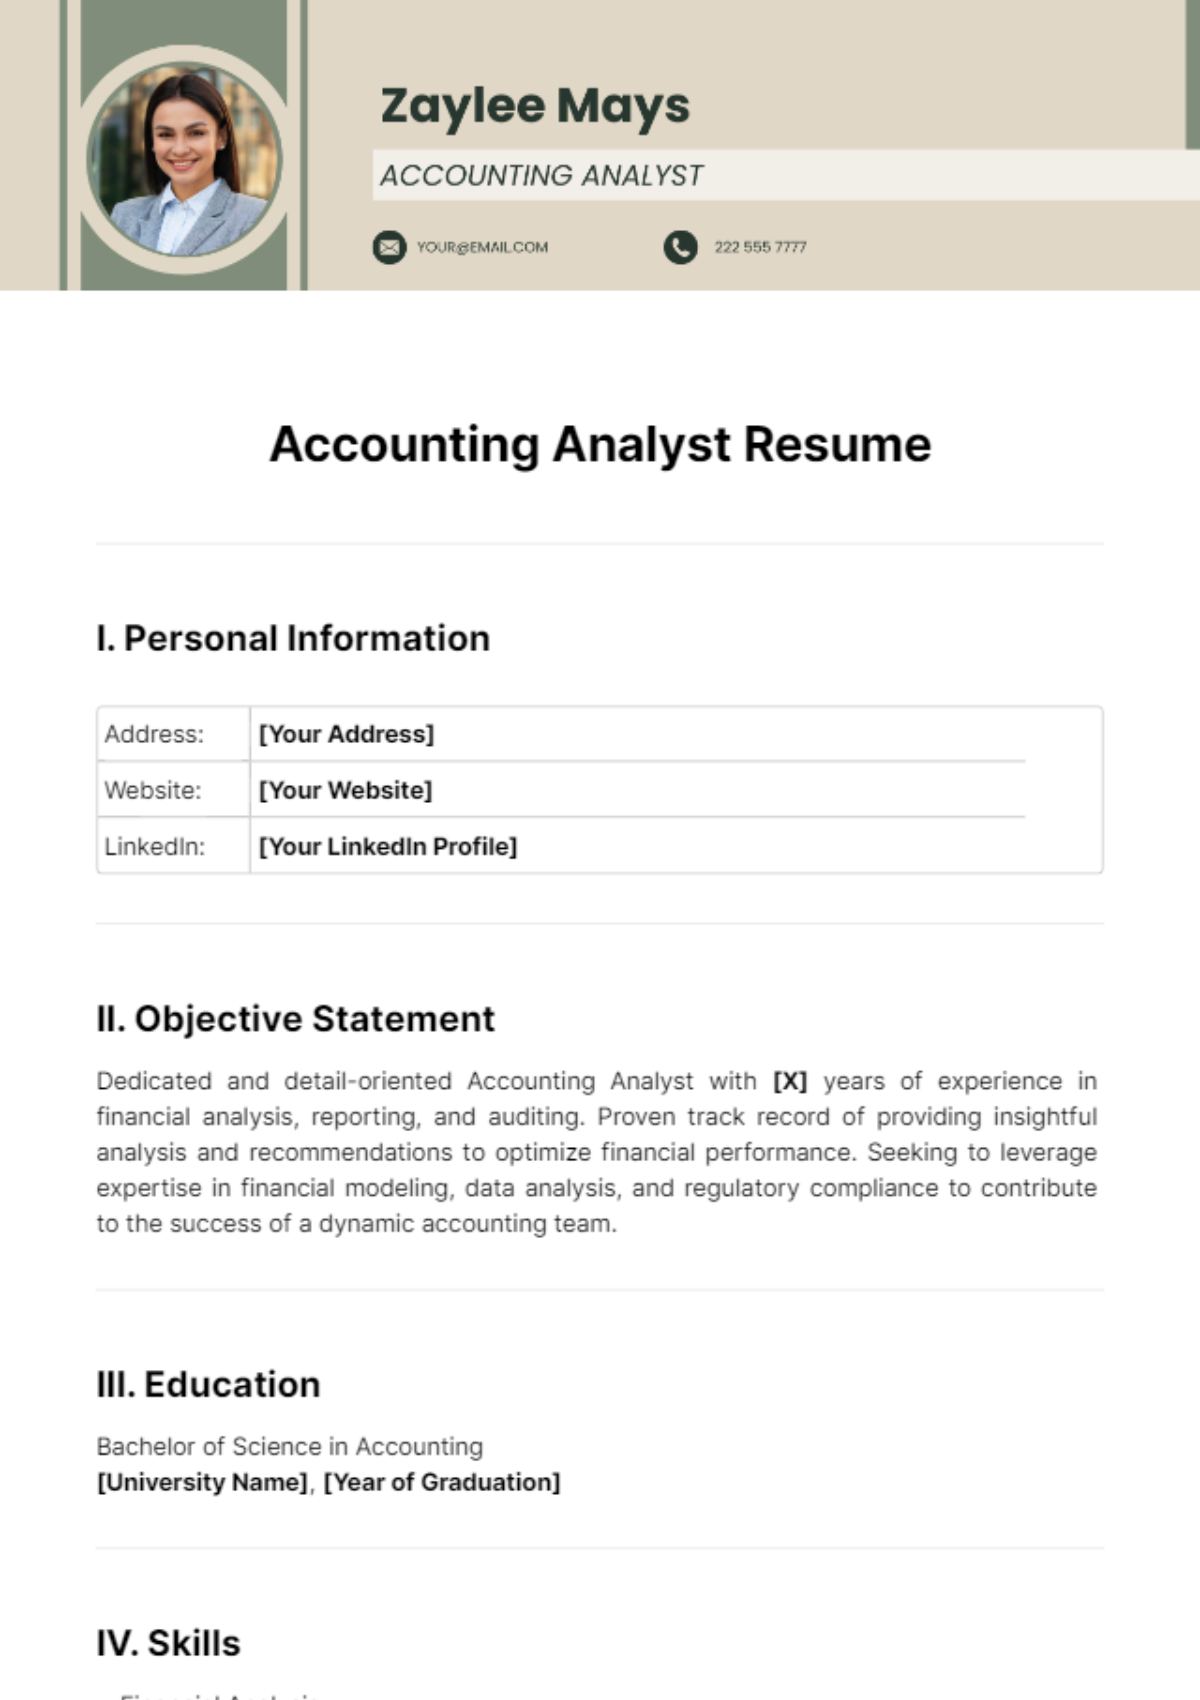 Accounting Analyst Resume Template